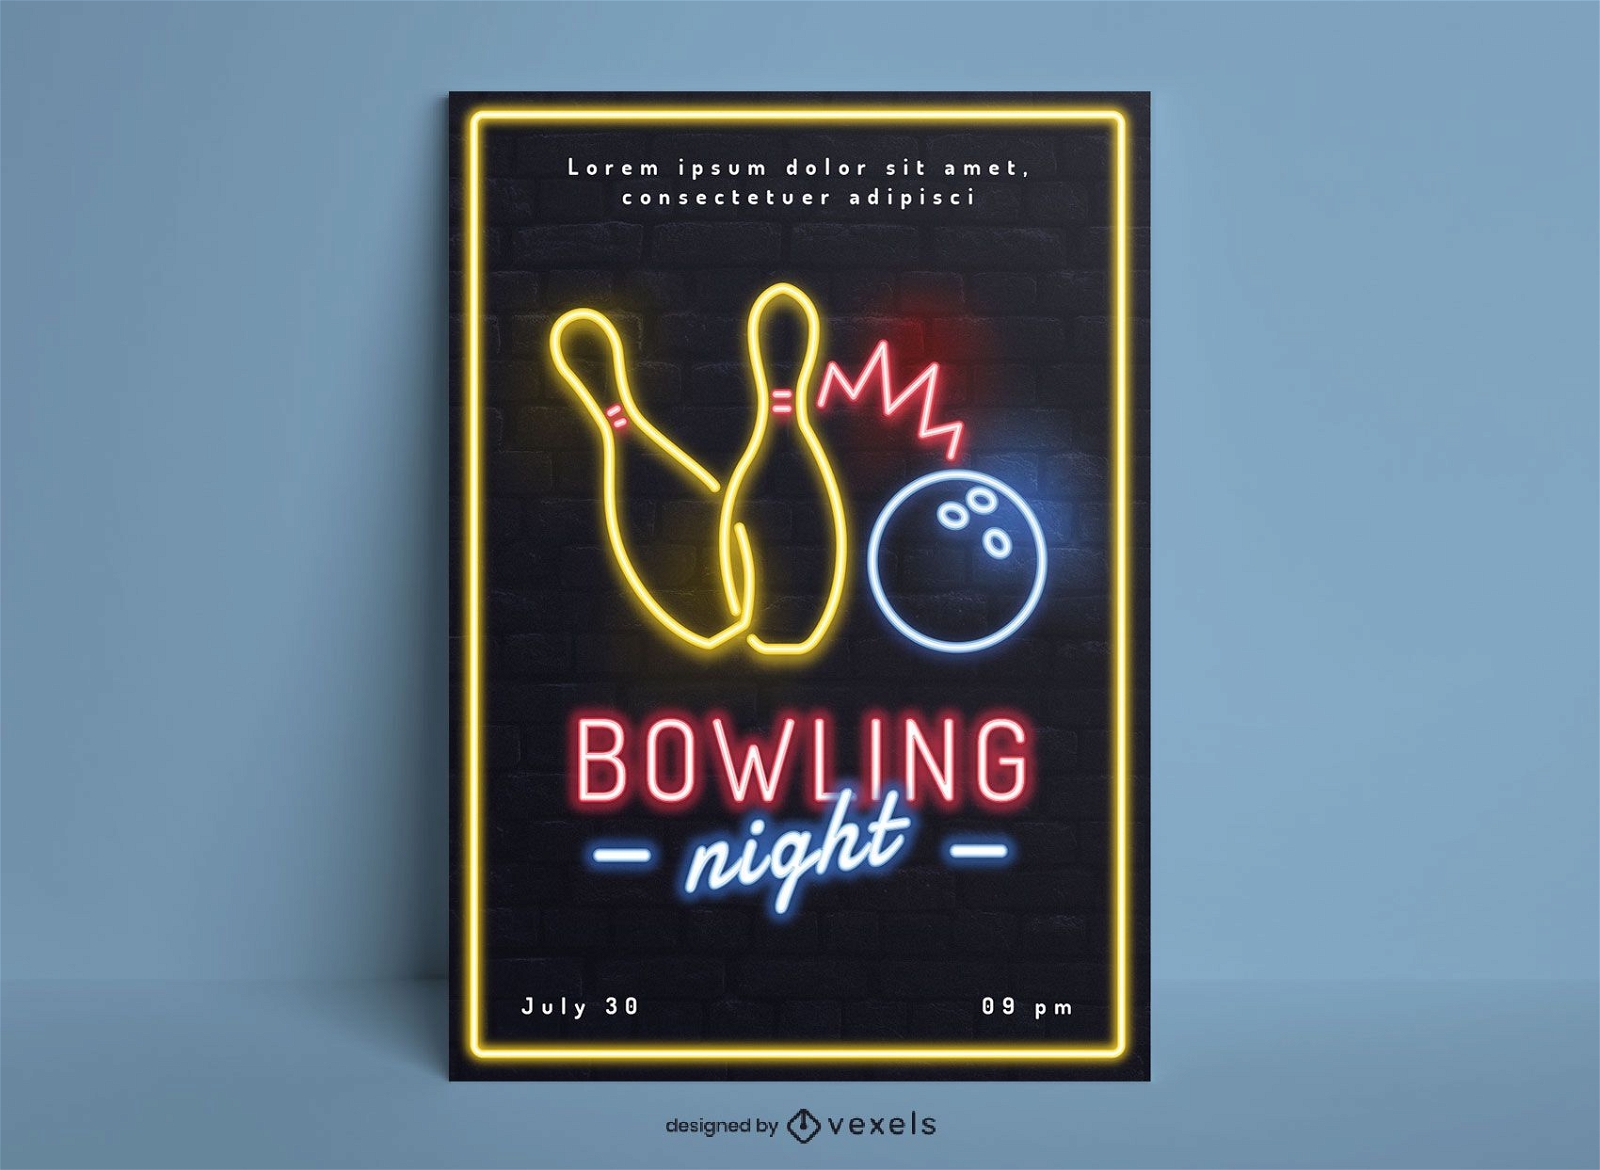 Bowling night hobby neon poster design